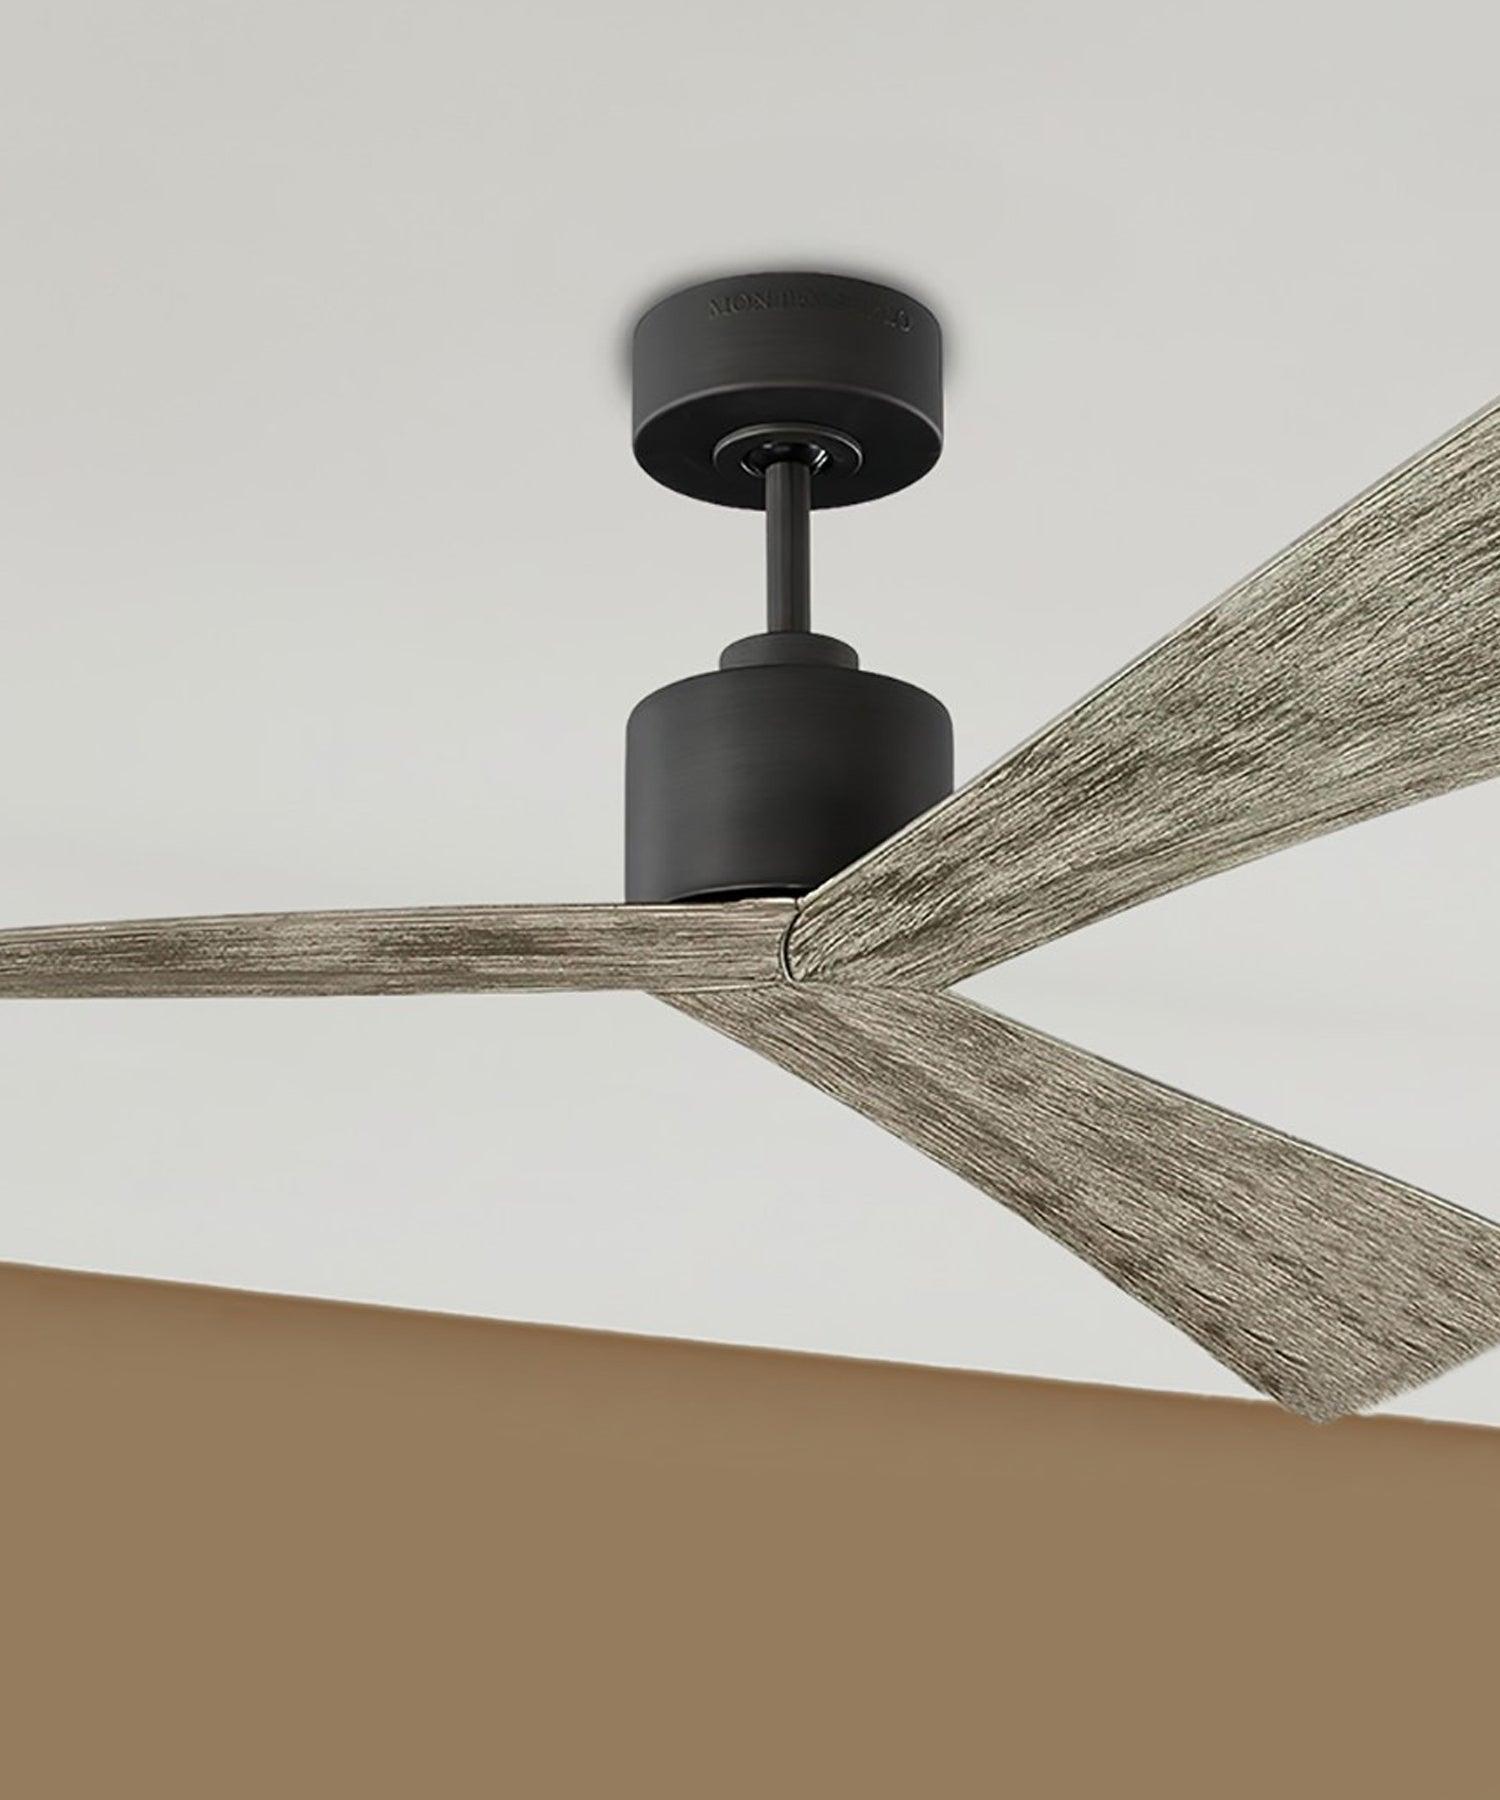 Monte Carlo Modern Ceiling Fans - Bees Lighting